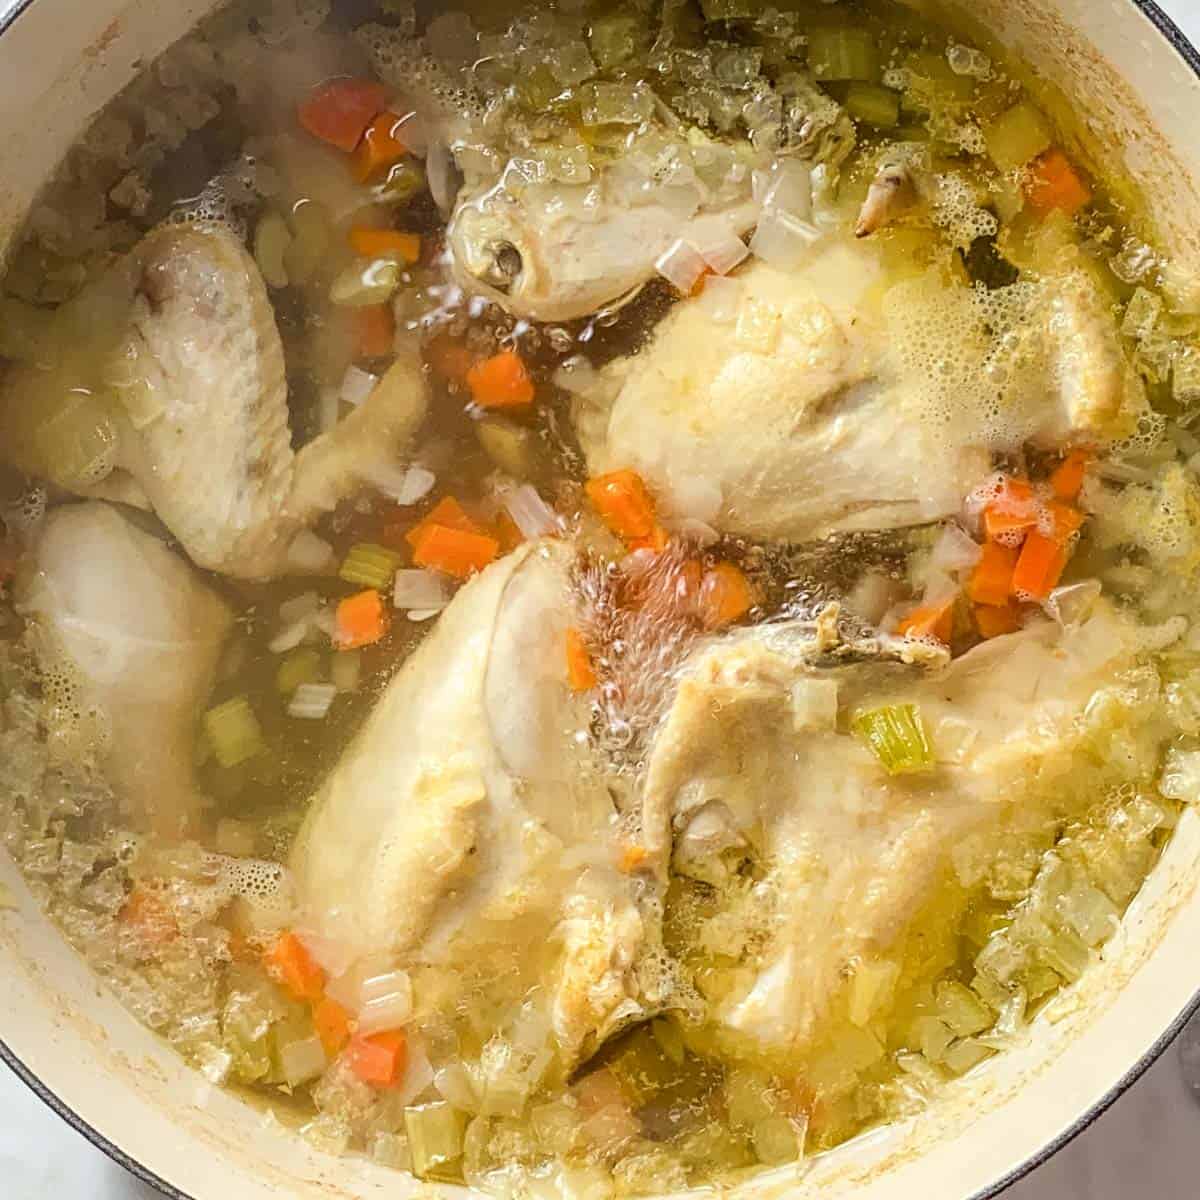 Image of Homemade Chicken Soup simmering in a large cream colored Le Creuset Dutch Oven.